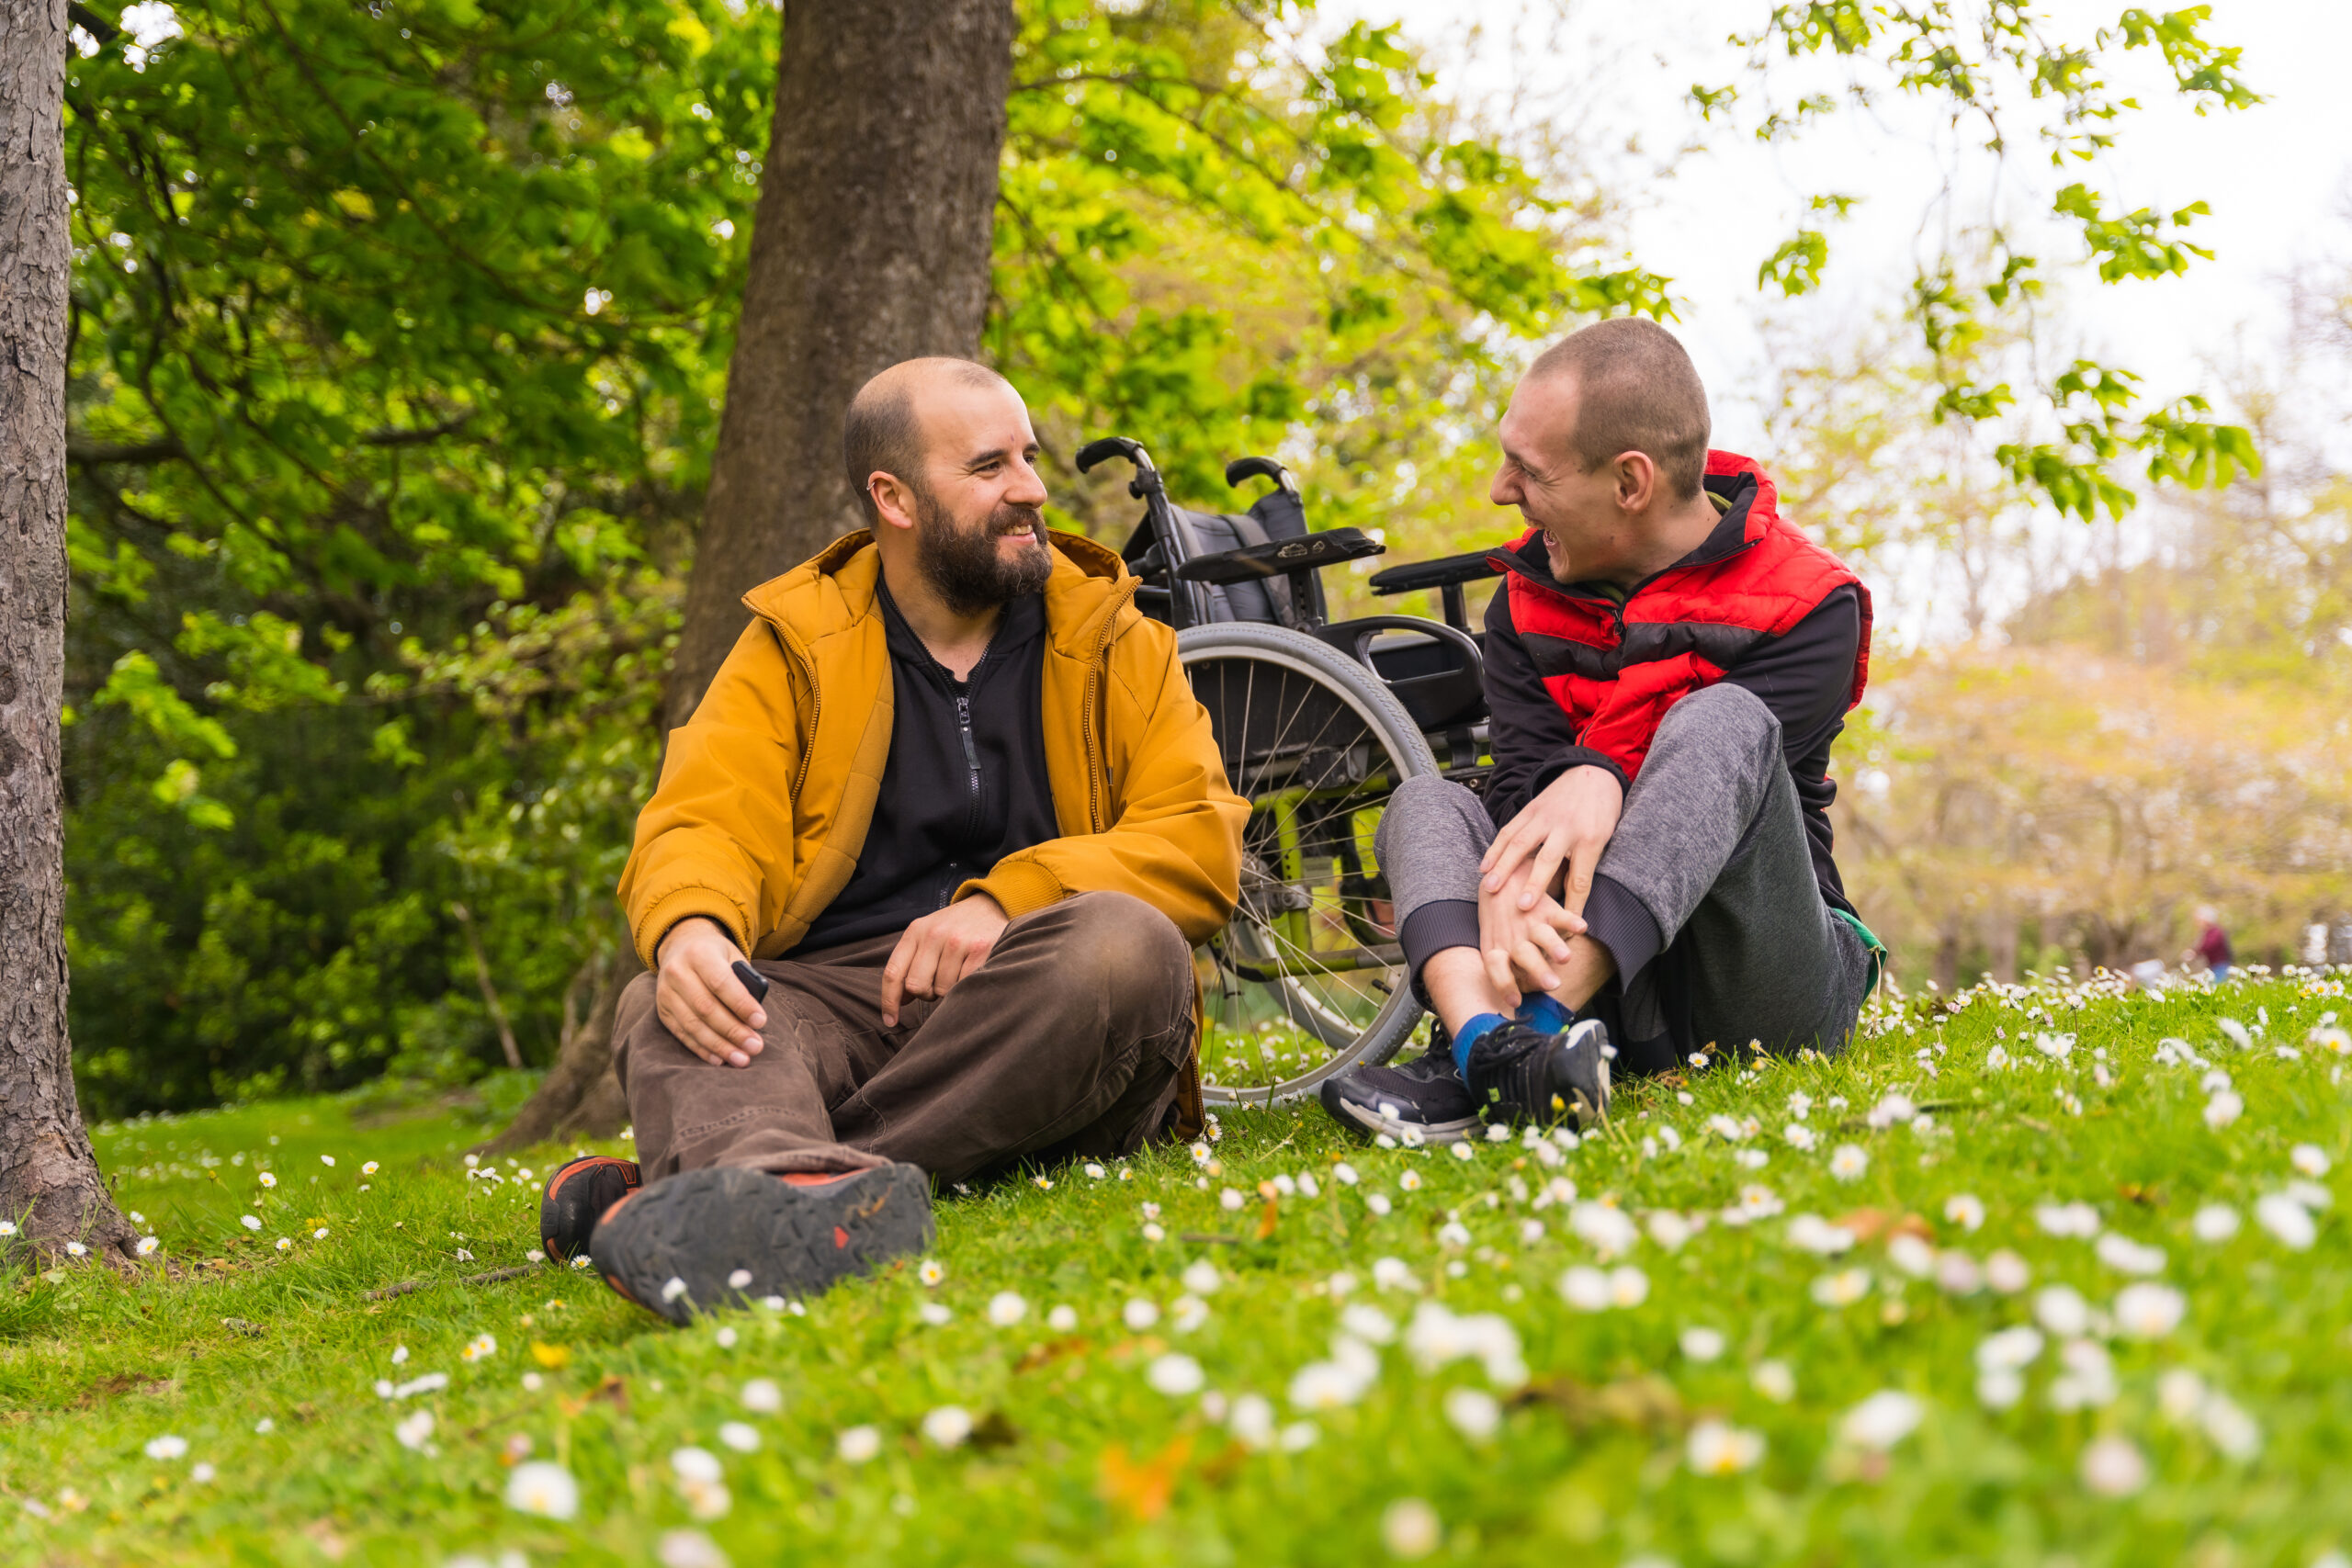 Two disabled men talking in the park stock photo.